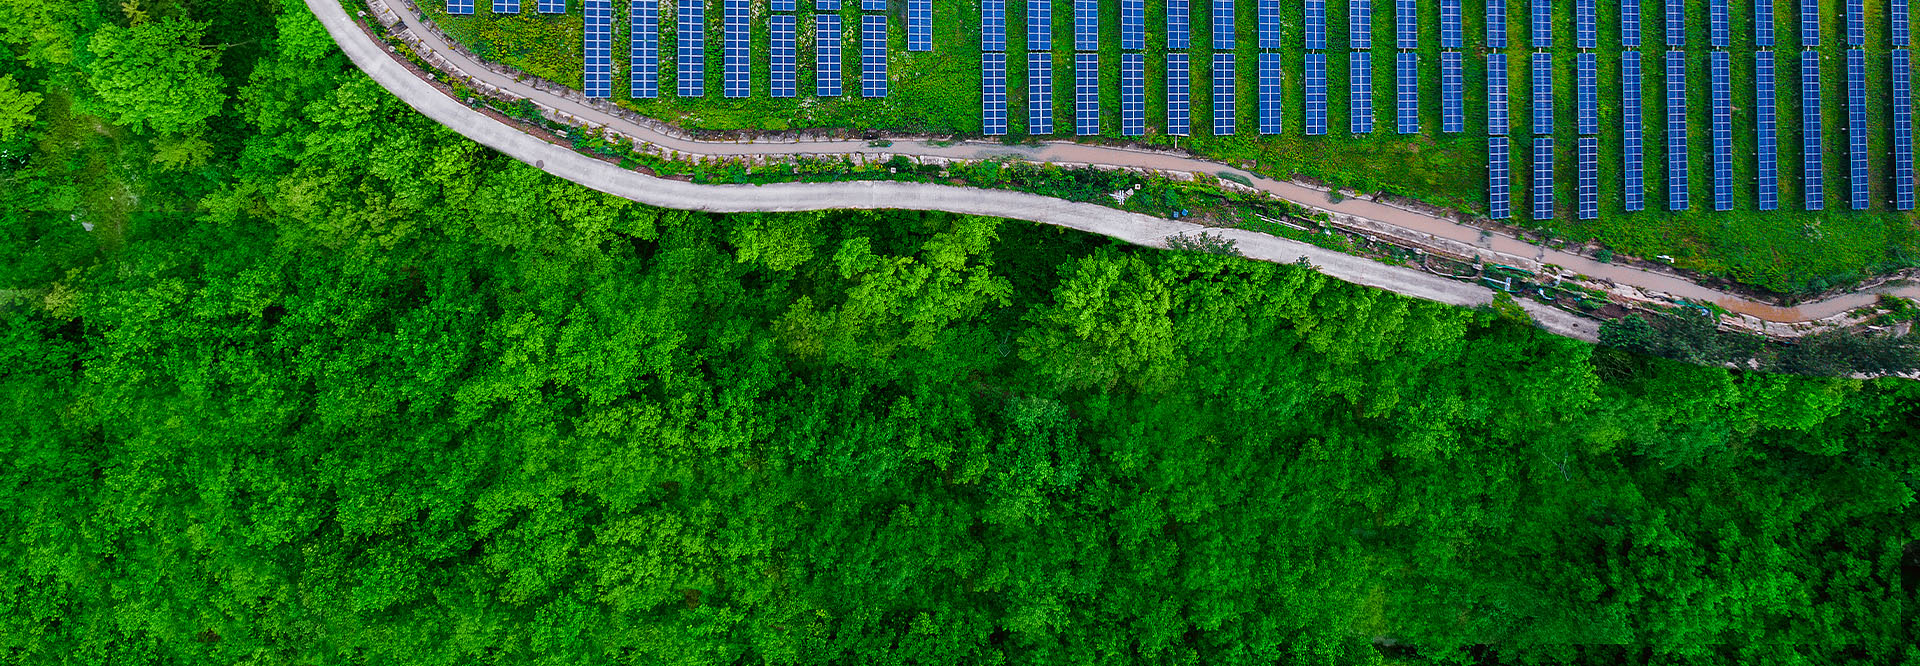 Aerial view of a forest with a road next to a river and solar panels (photo)